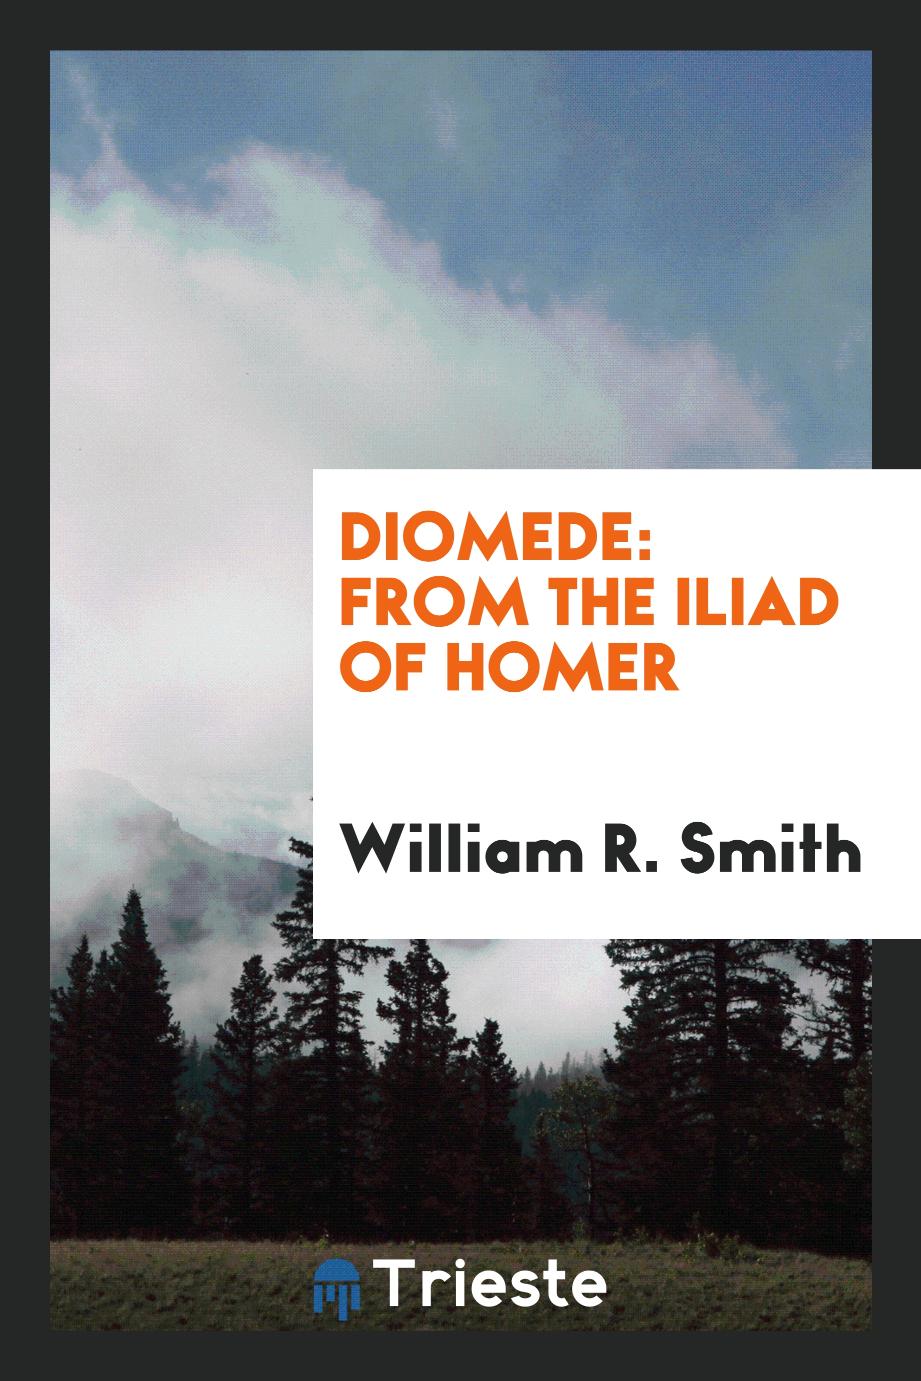 Diomede: from the Iliad of Homer